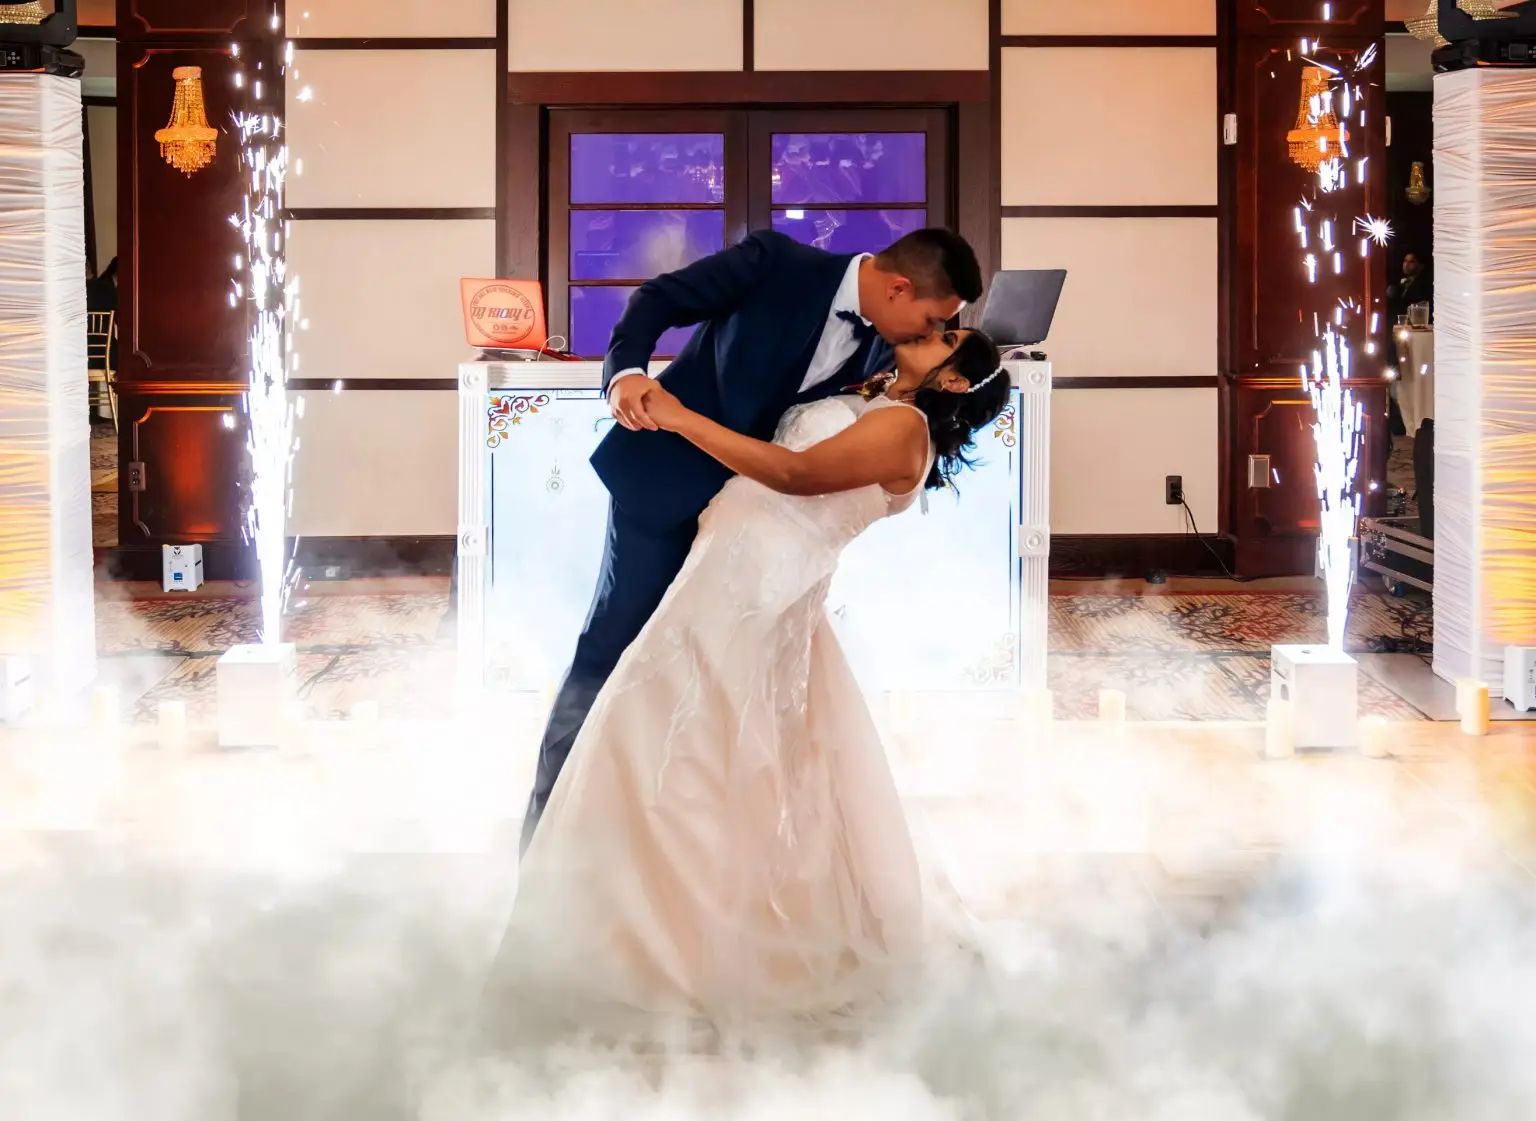 Mixn It Up Events - Dancing on the clouds - Weddings and Special Events in New Jersey